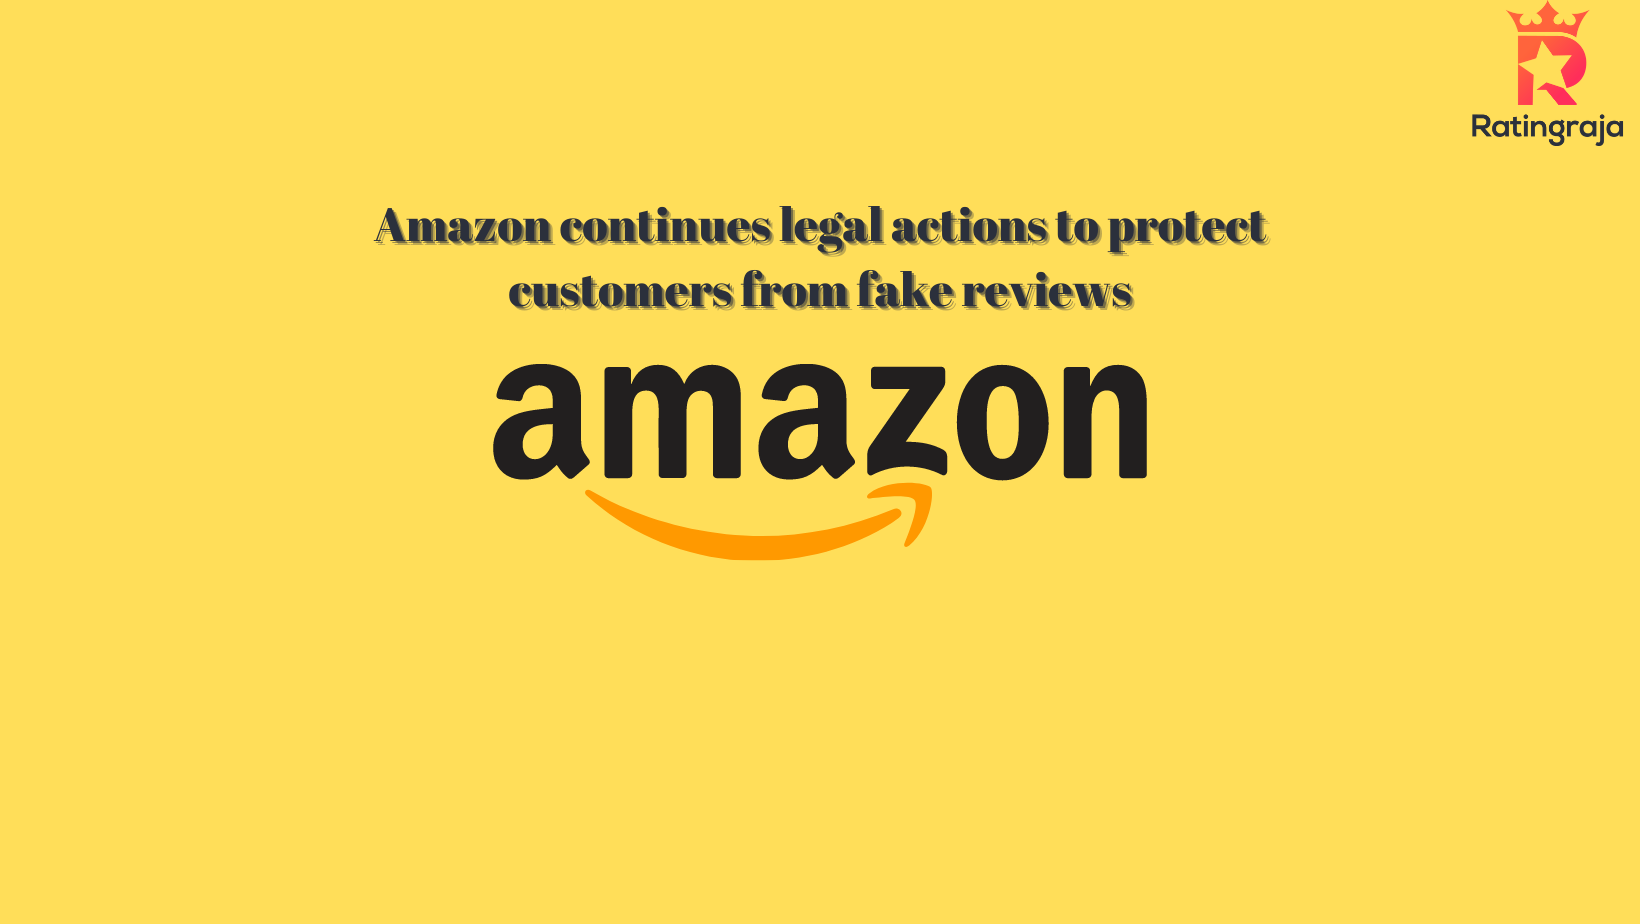 Amazon continues legal actions to protect customers from fake reviews